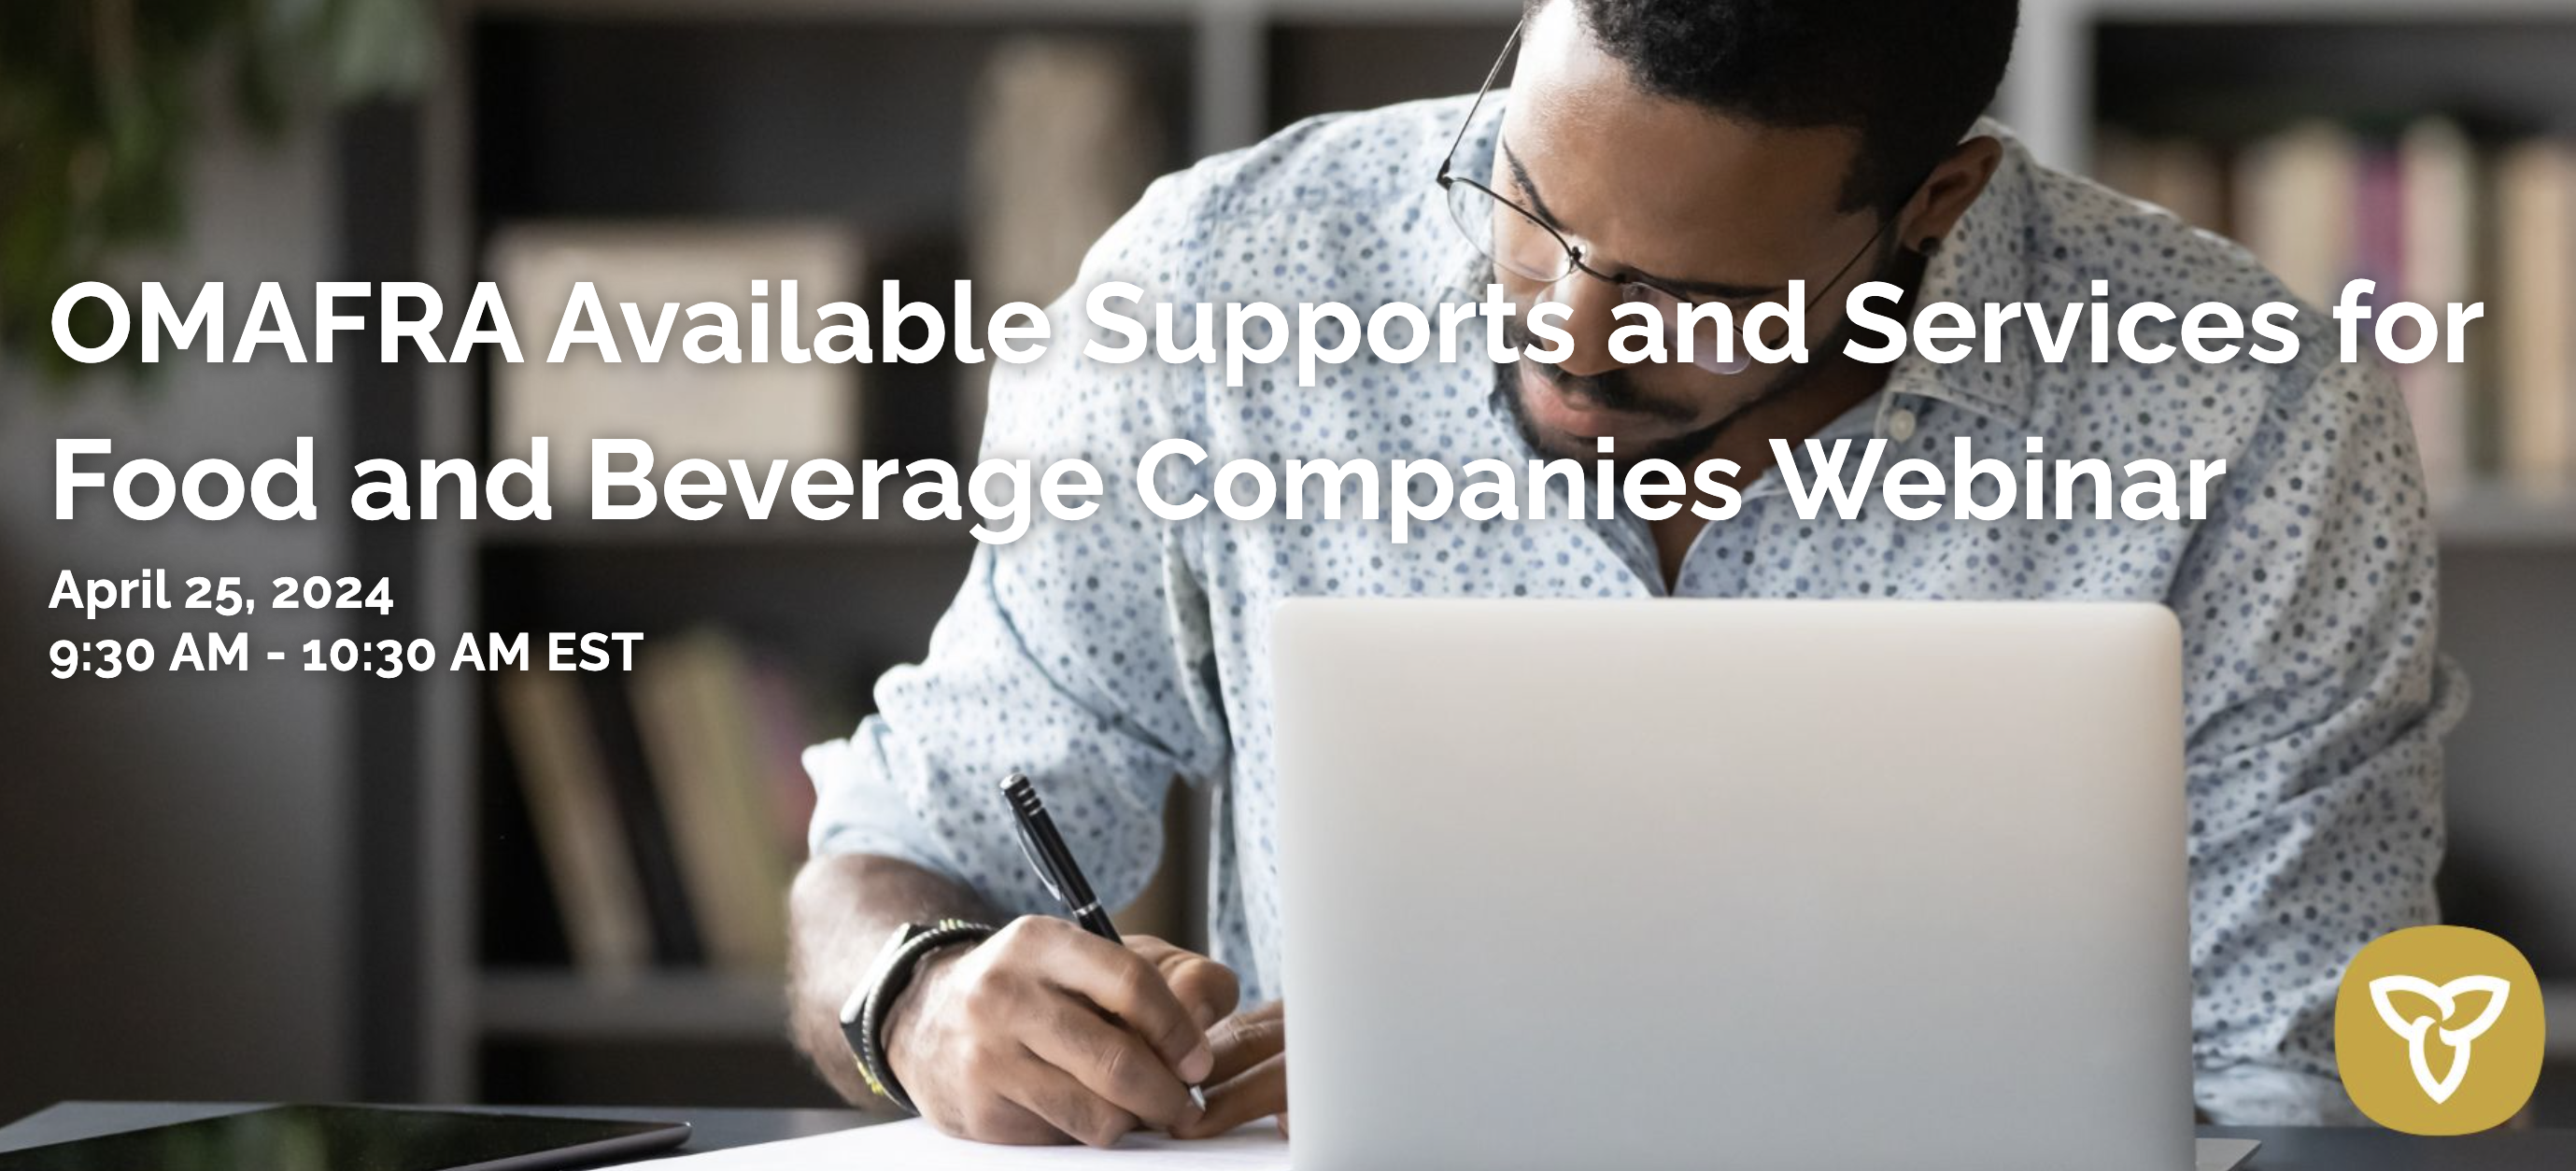 OMAFRA Available Supports and Services for Food and Beverage Companies Webinar